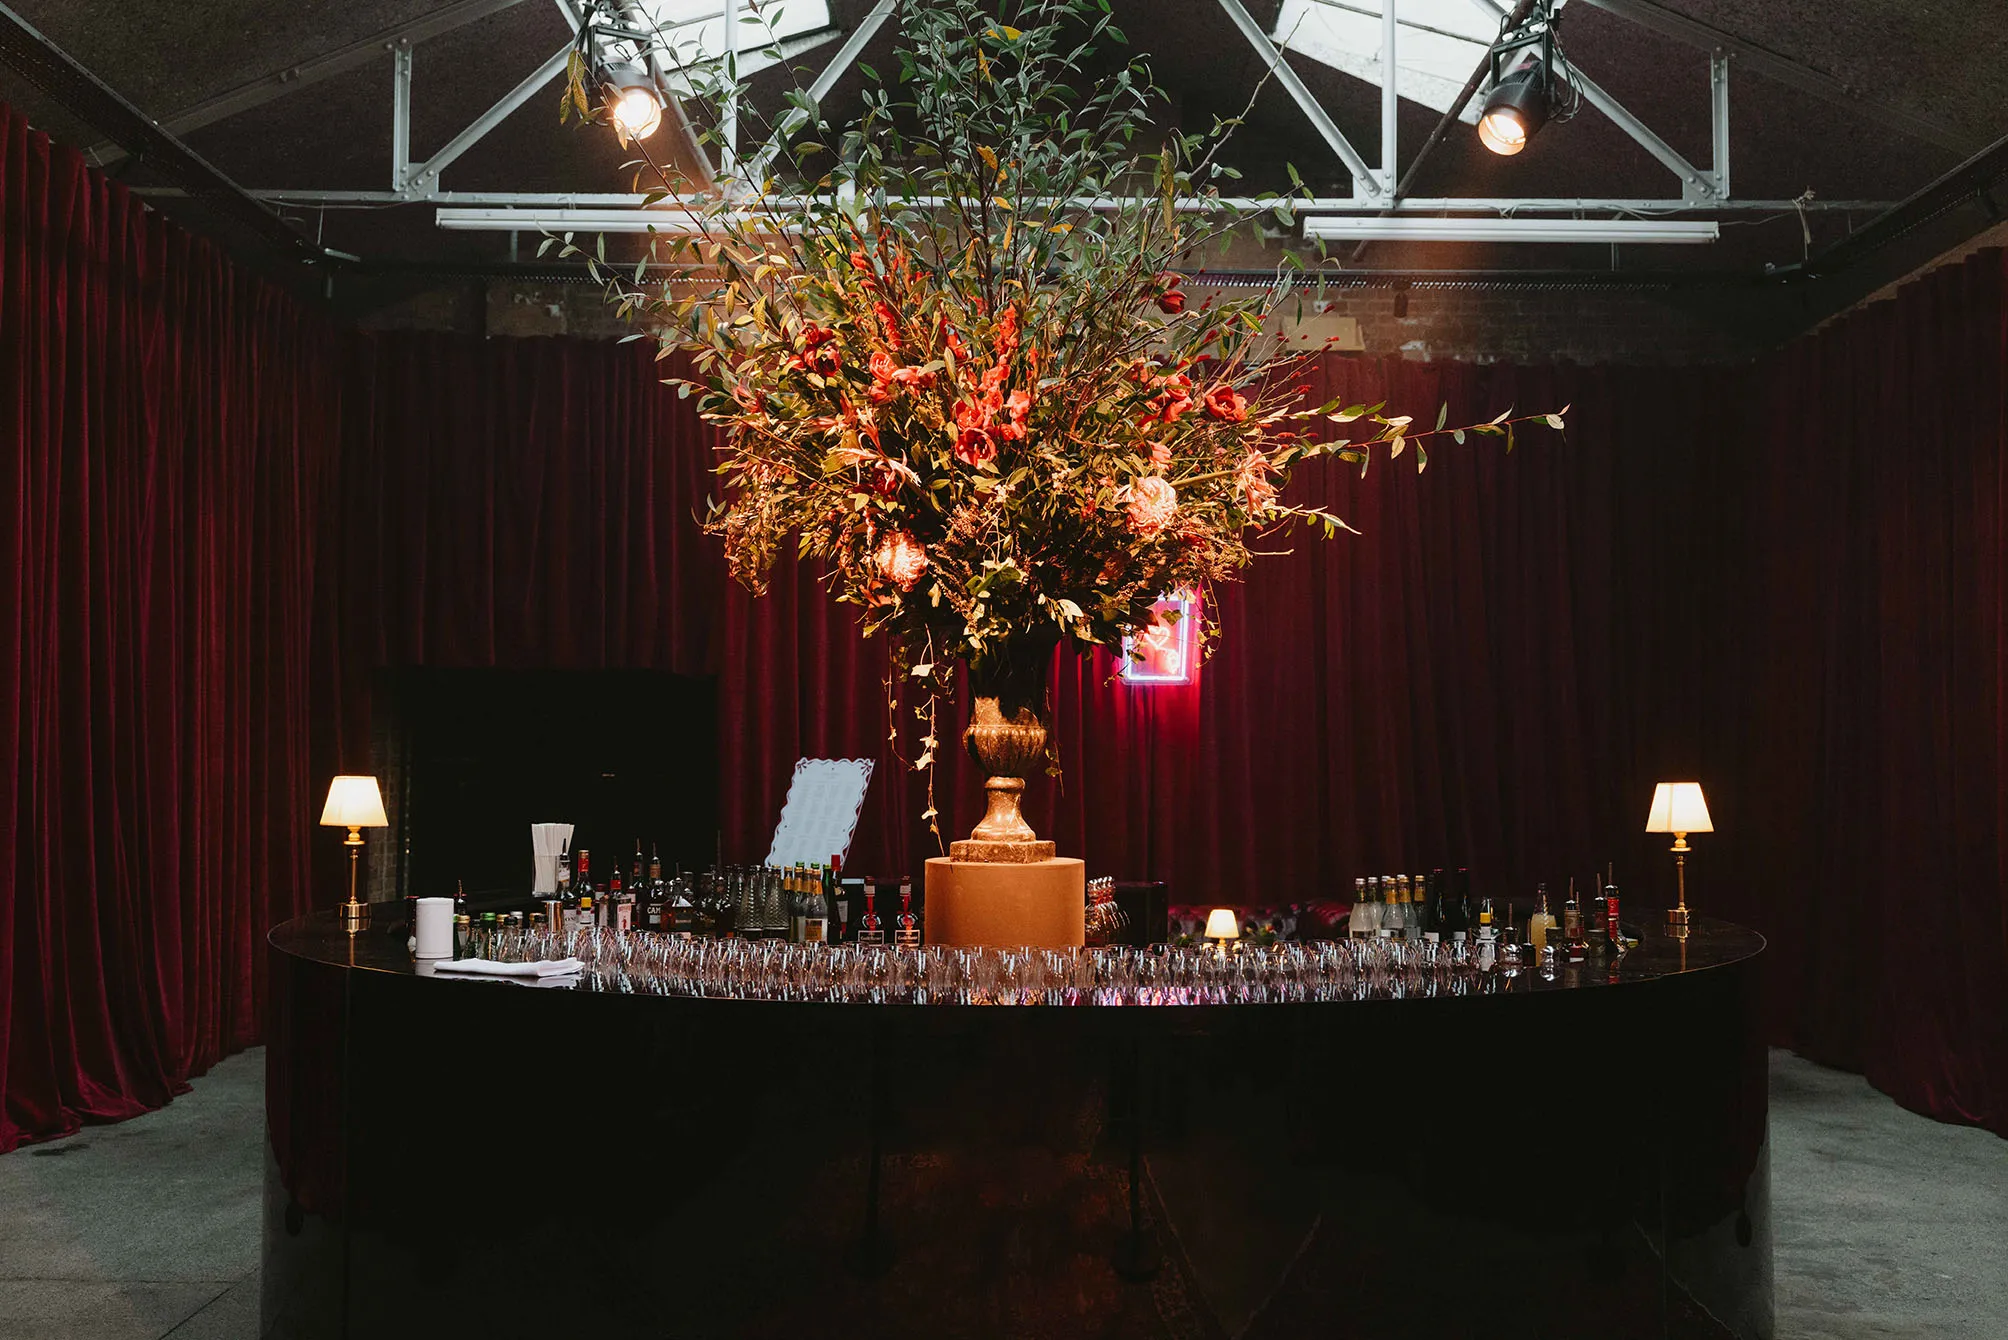 The wedding of Tom Odell and Georgie Somerville